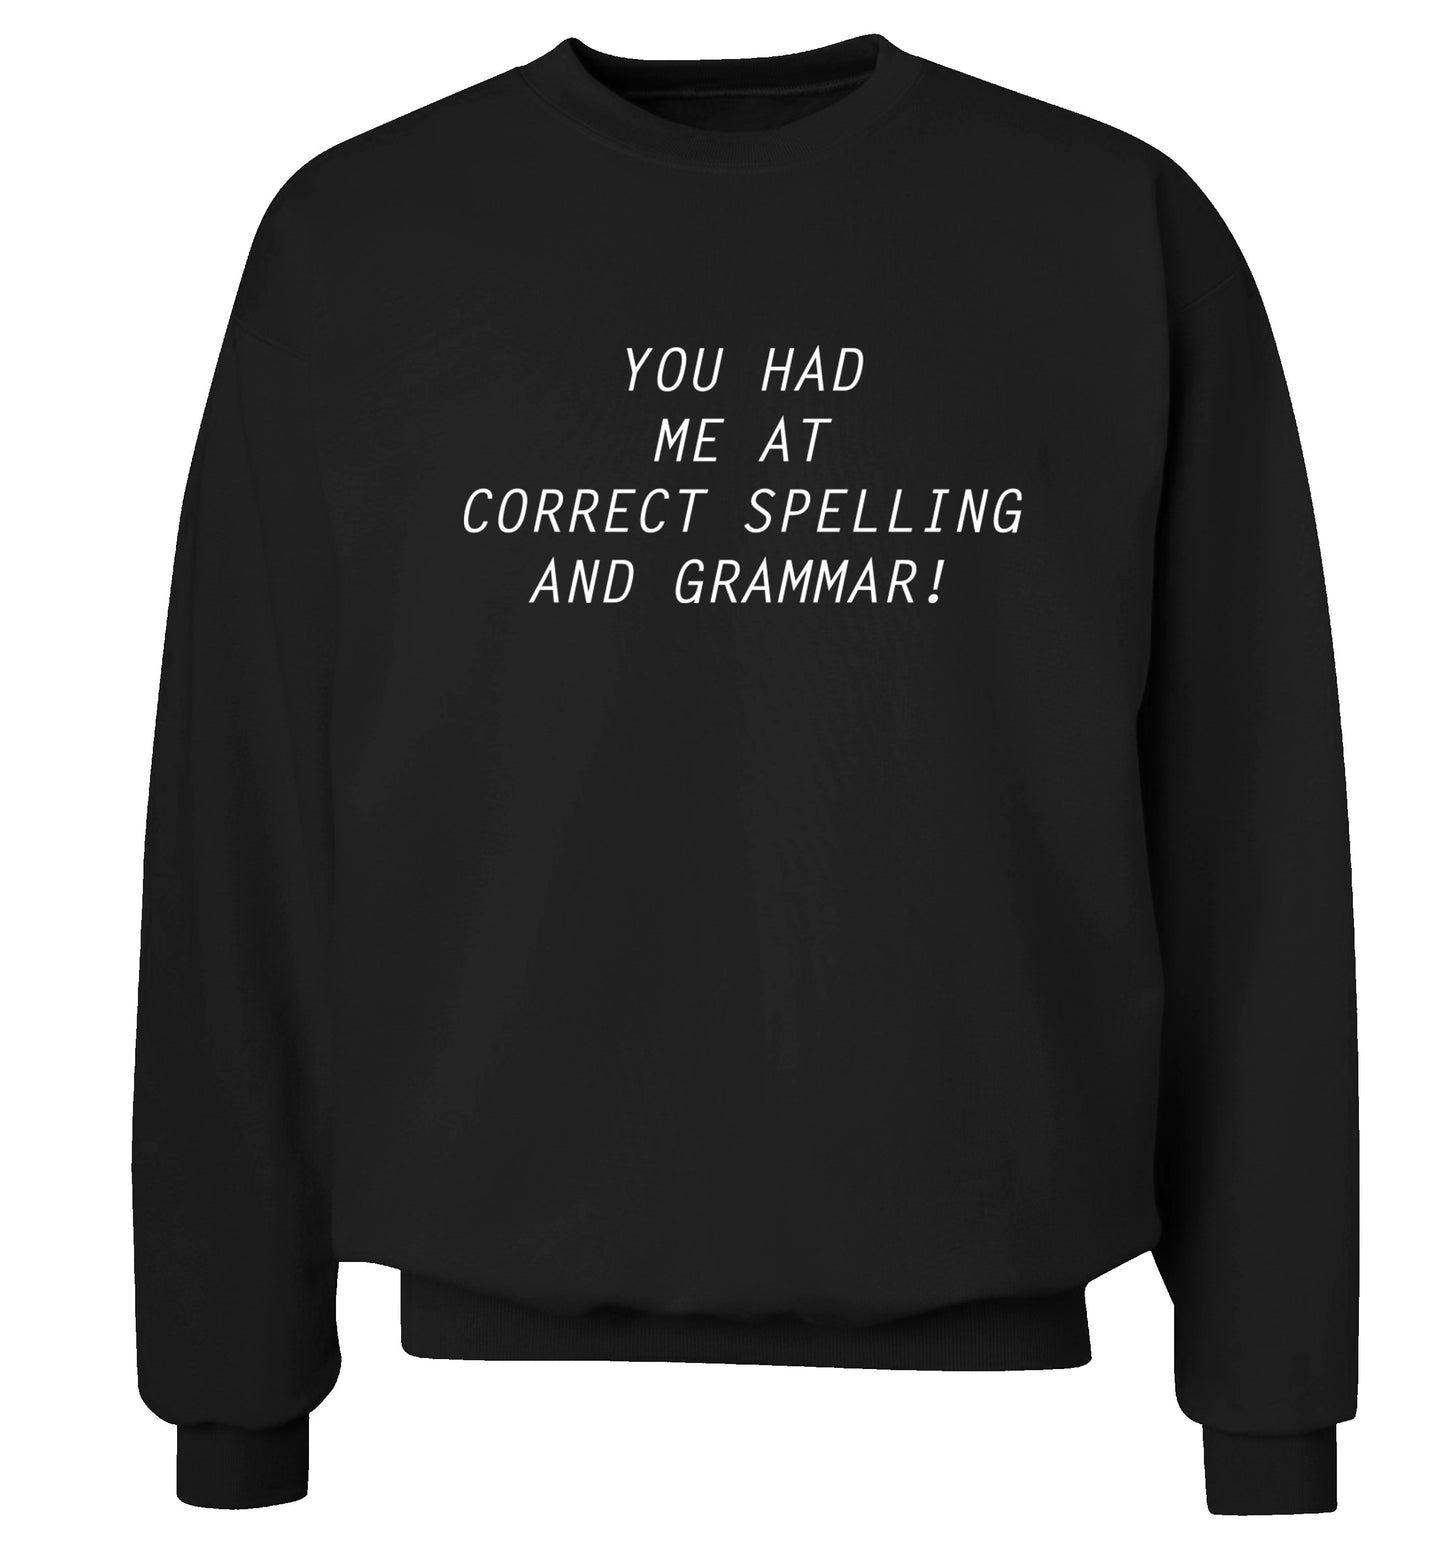 You had me at correct spelling and grammar Adult's unisex black Sweater 2XL